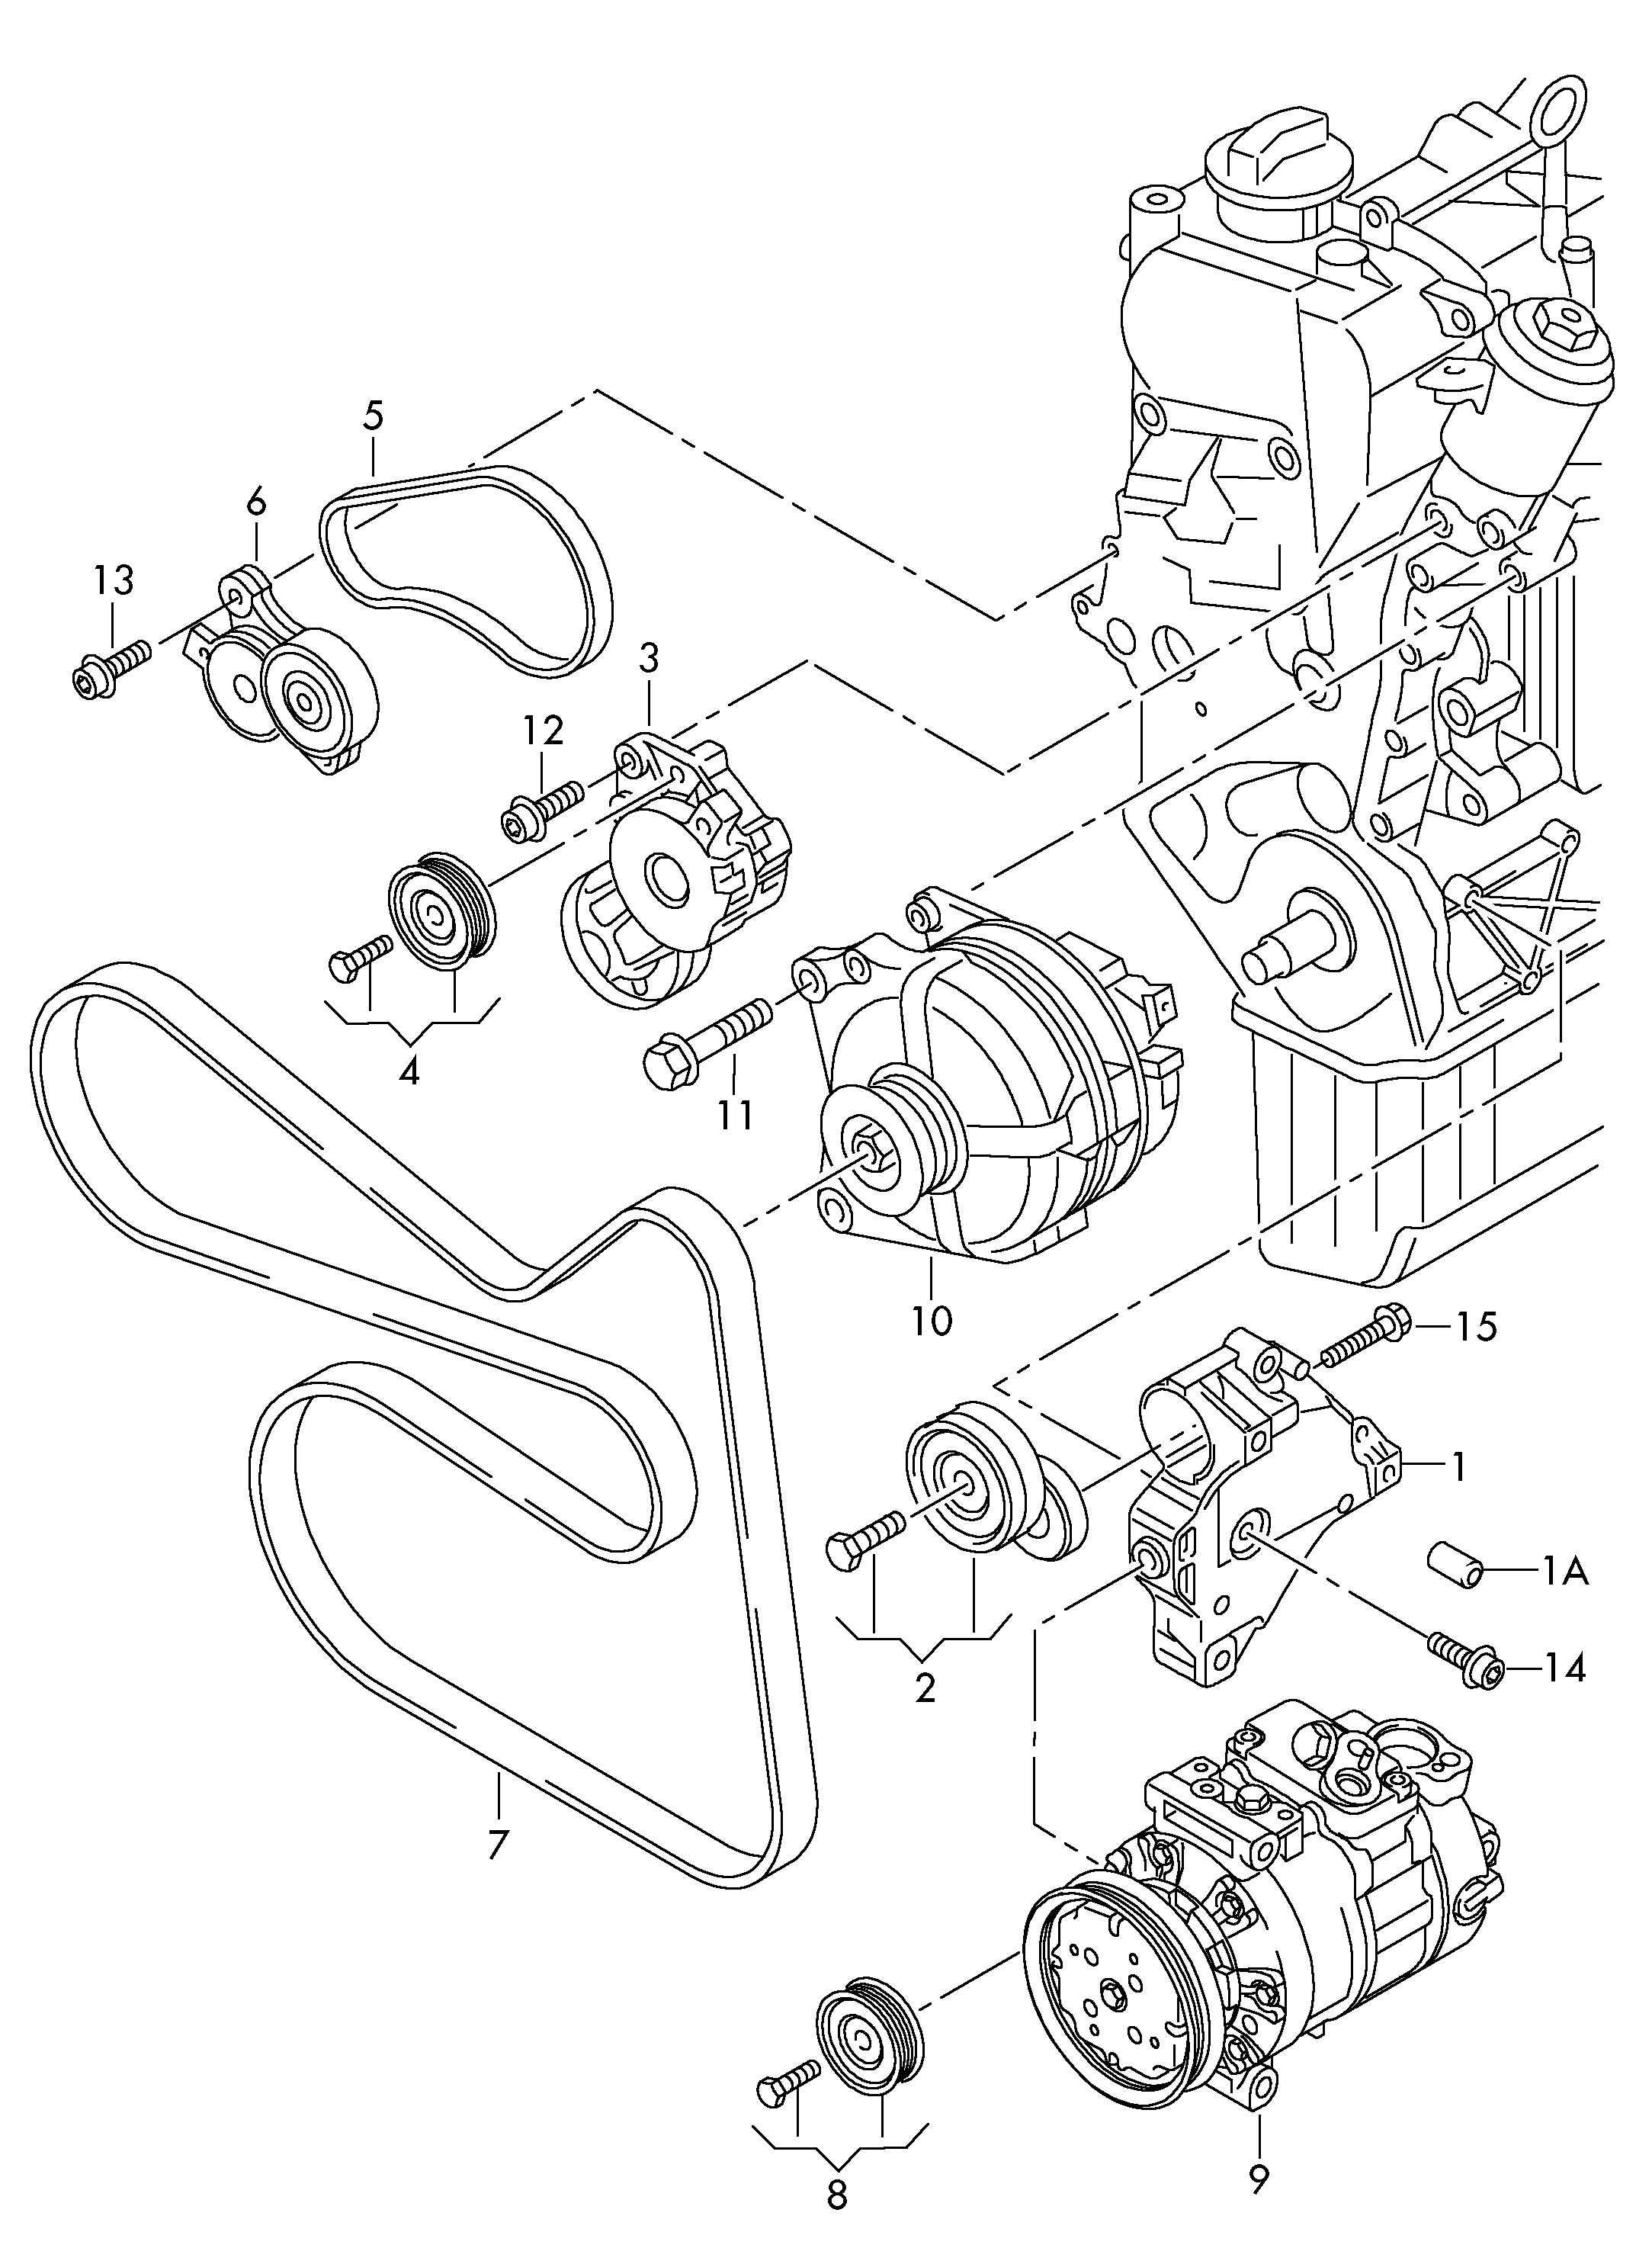 connecting and mounting parts
for alternator; pol... - Tiguan(TIG)  